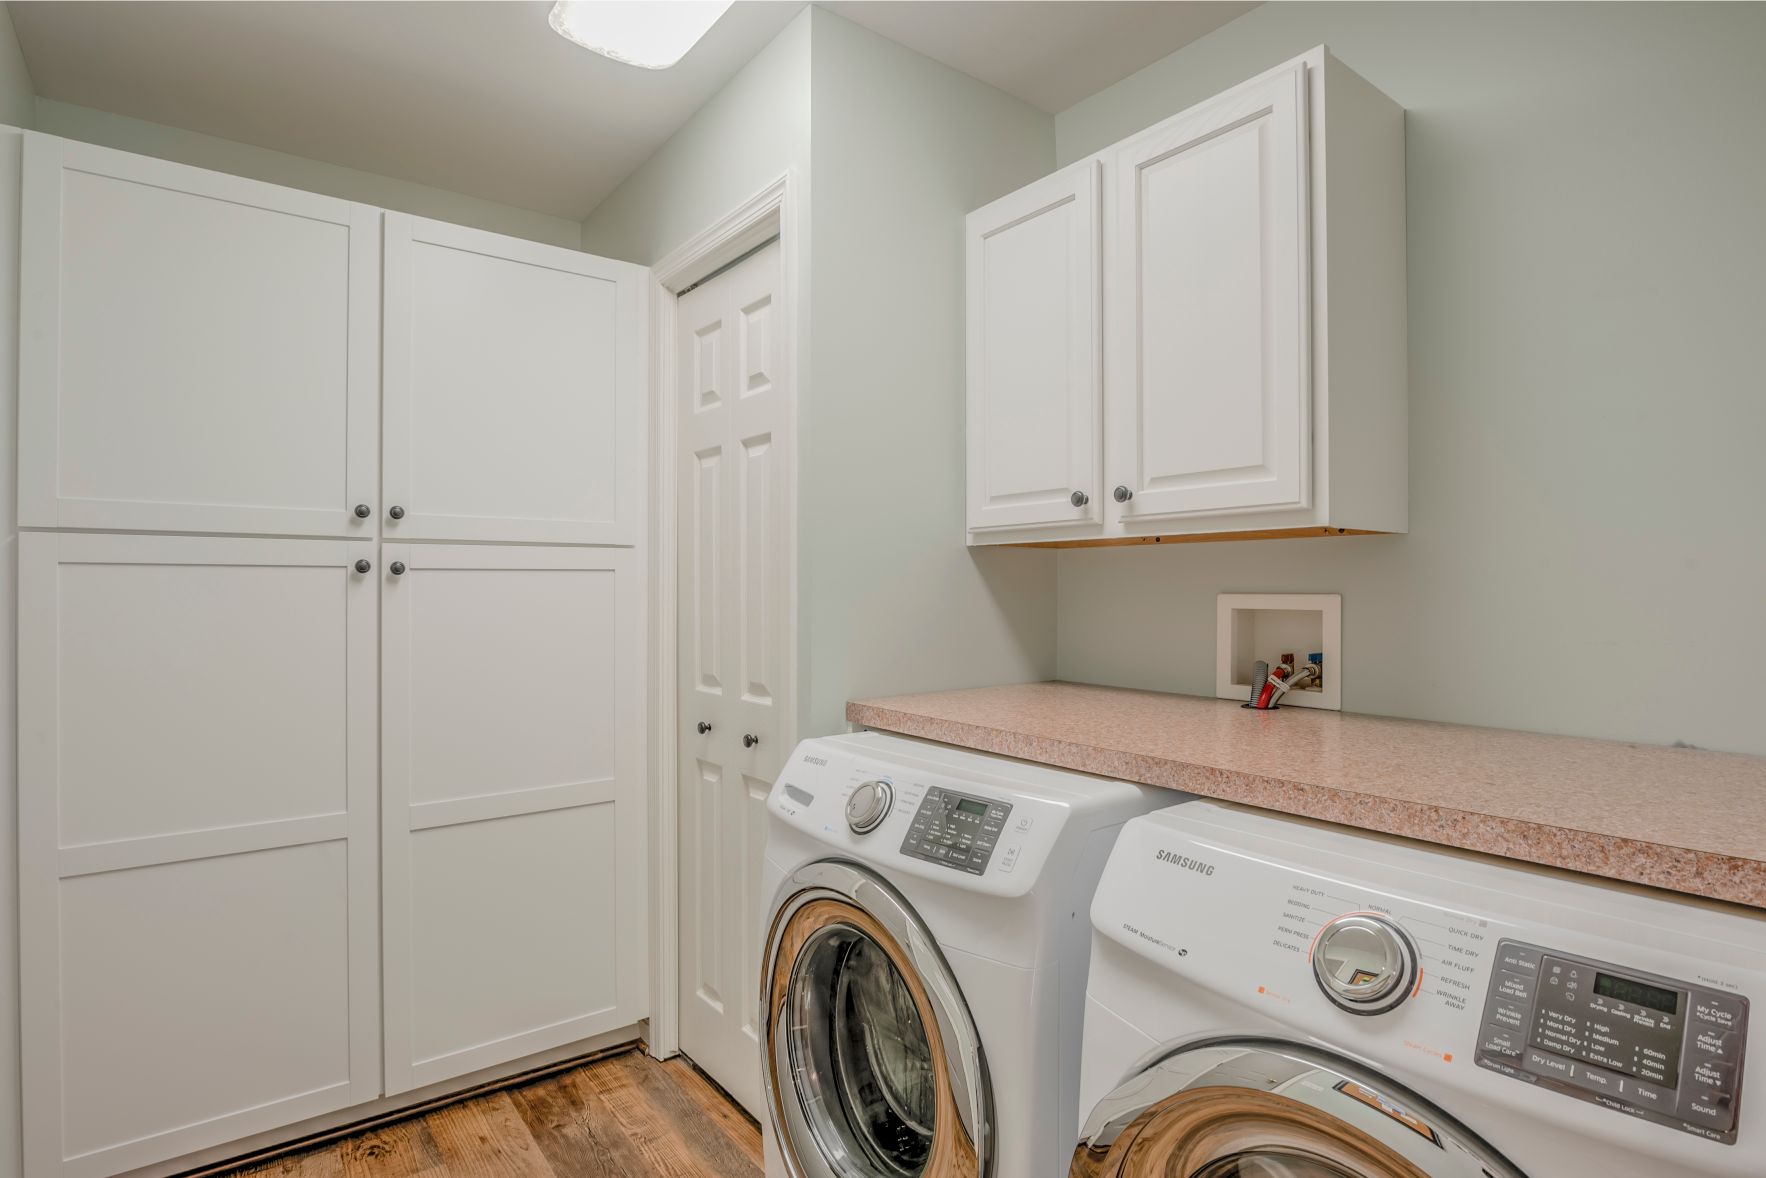 Kitchen Remodel in Velta Drive, Ocean View DE - Laundry Area with White Closet